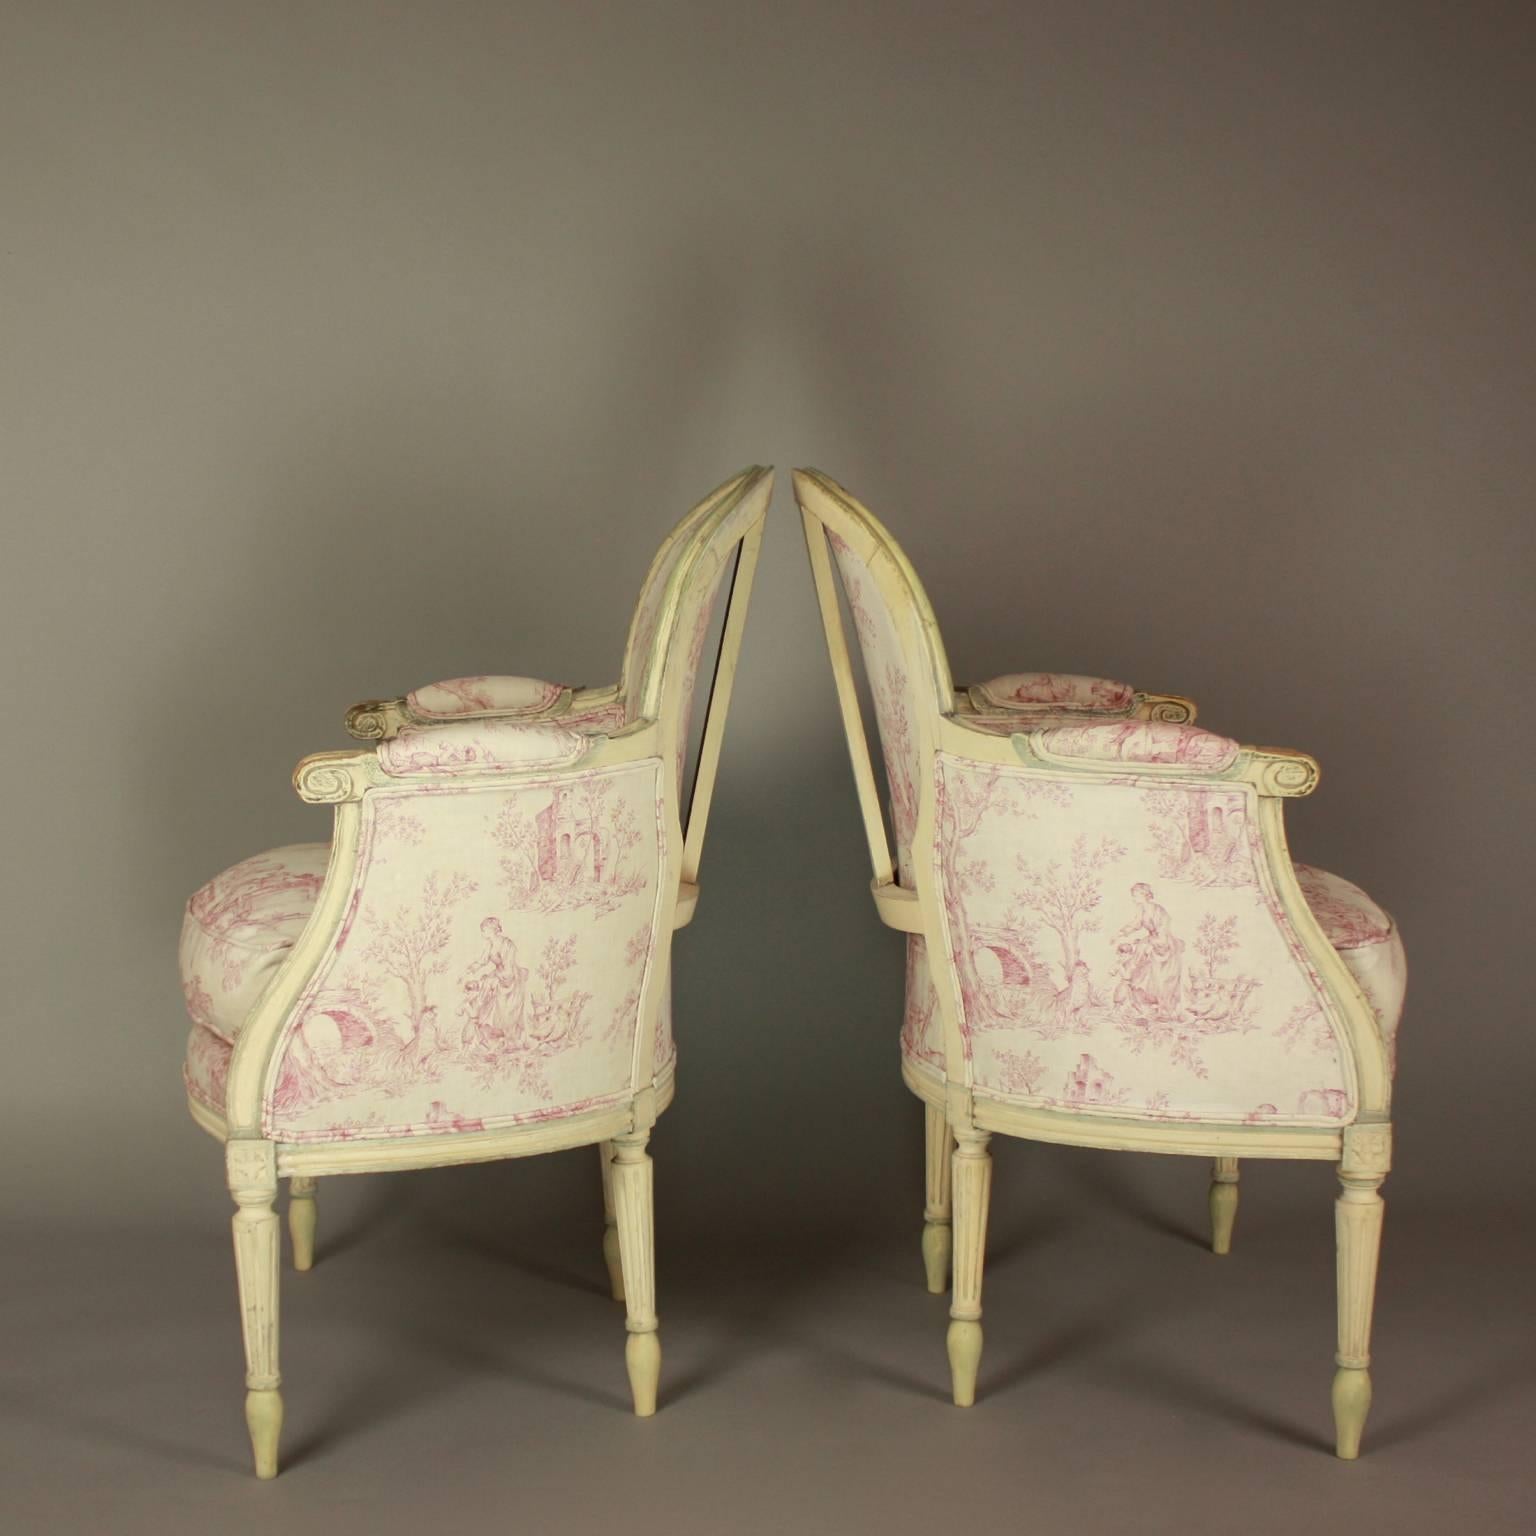 Carved Pair of French 19th Century Louis XVI Style Painted Wood Armchairs or Bèrgères